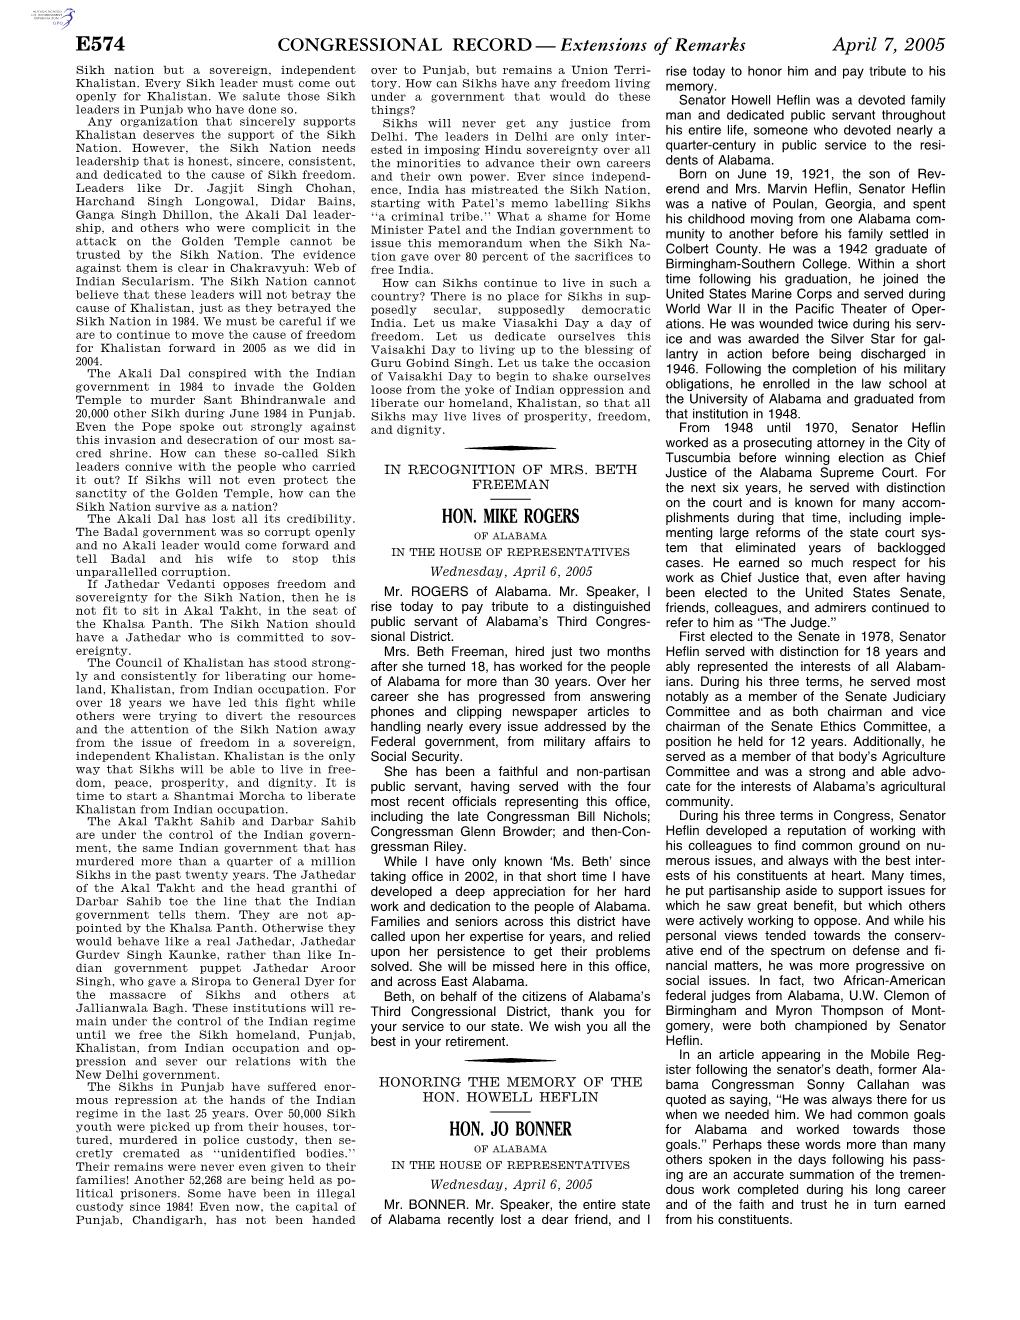 CONGRESSIONAL RECORD— Extensions of Remarks E574 HON. MIKE ROGERS HON. JO BONNER